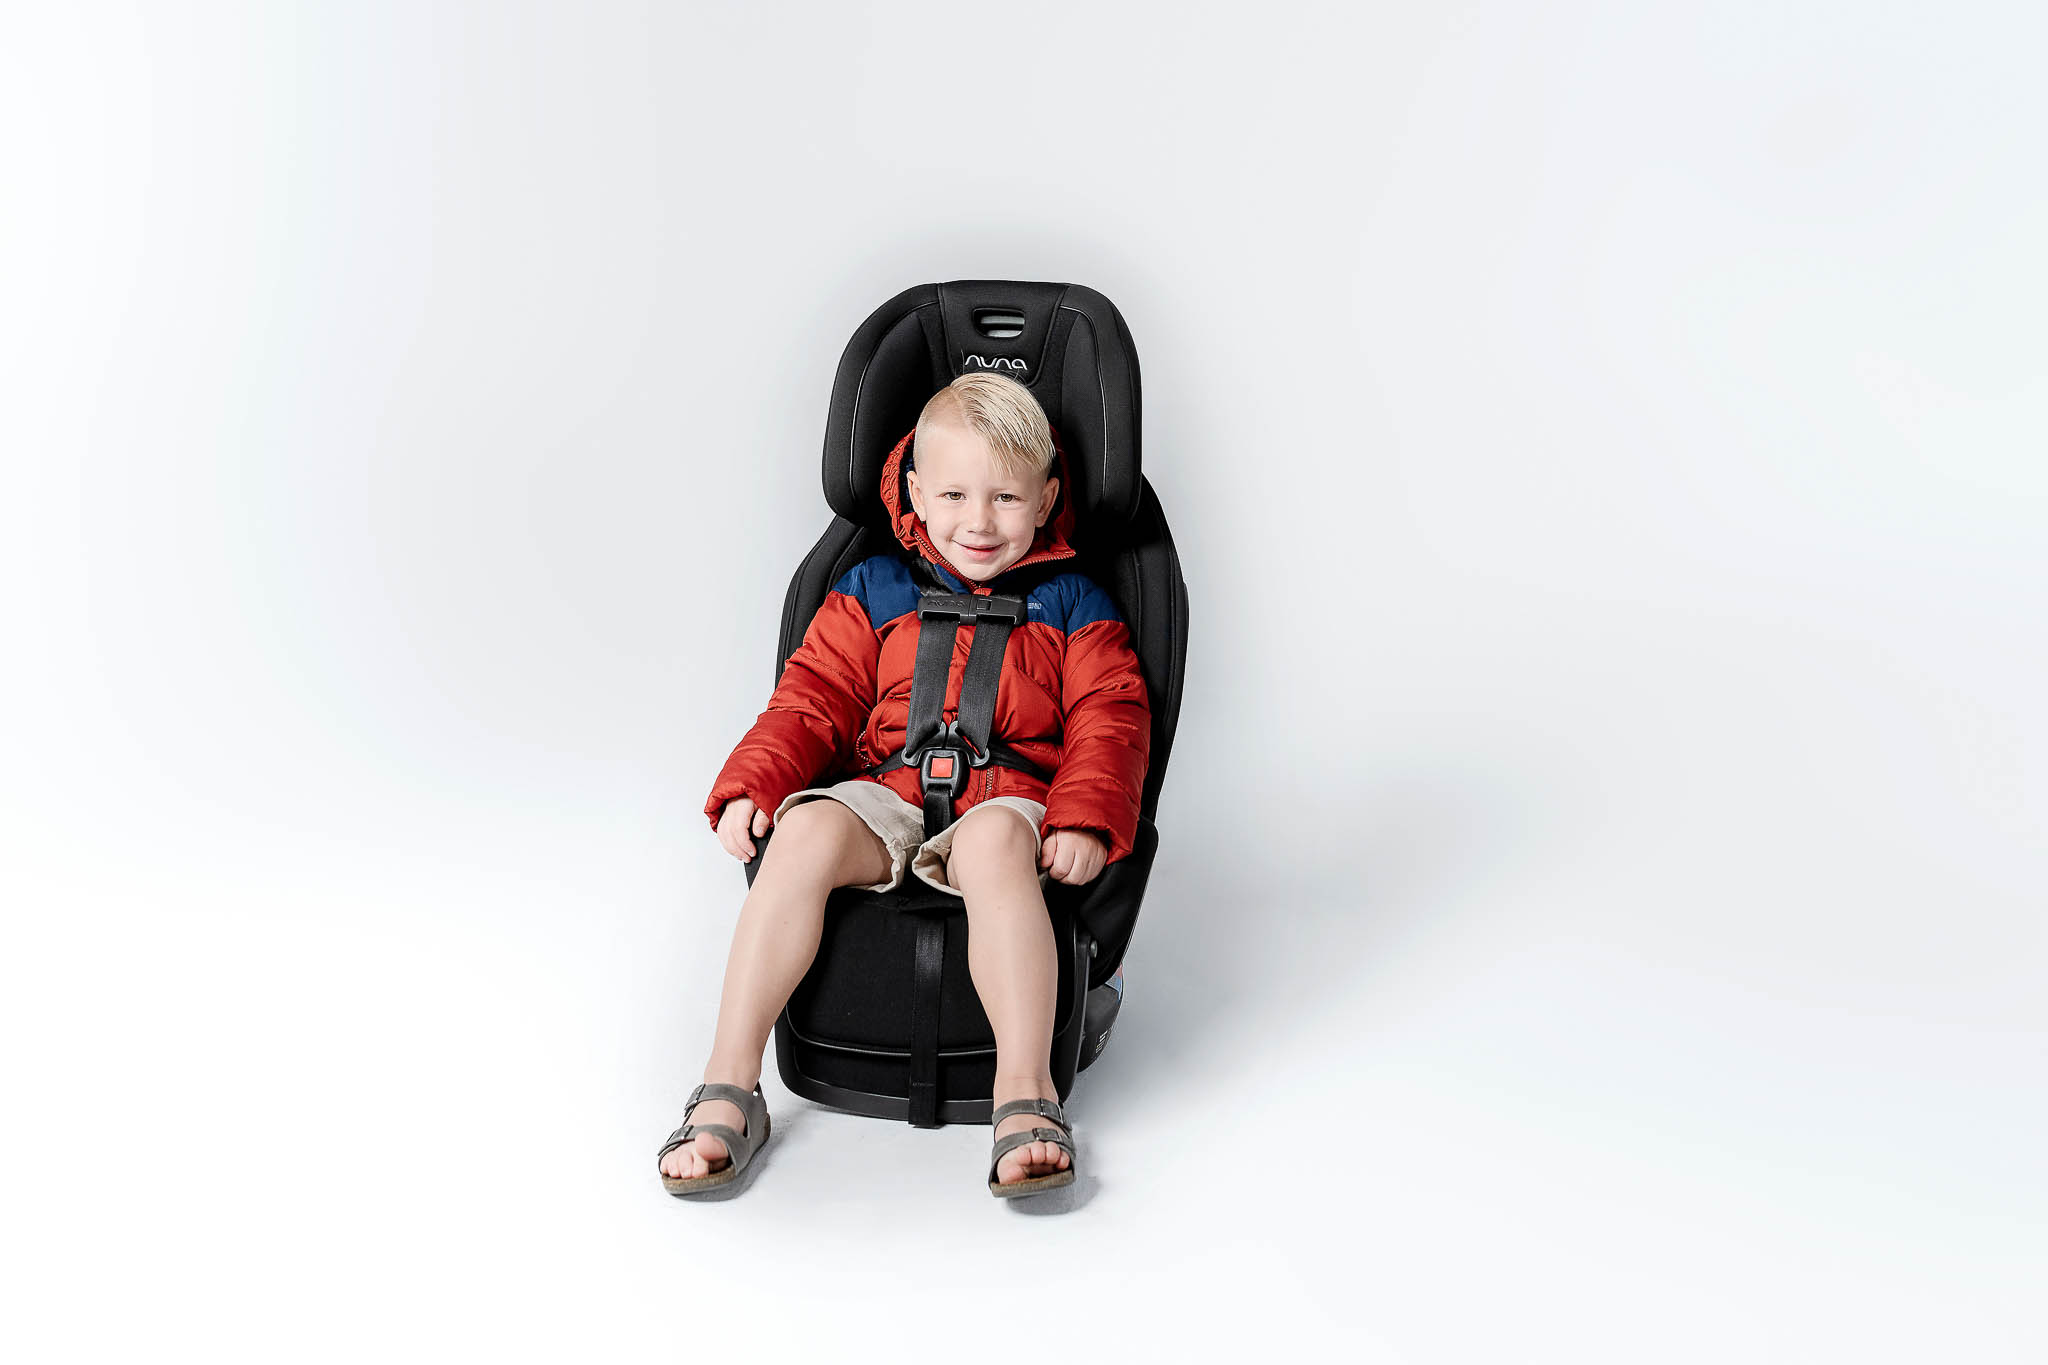 Winter Coats & Car Seat Safety  The University of Vermont Health Network